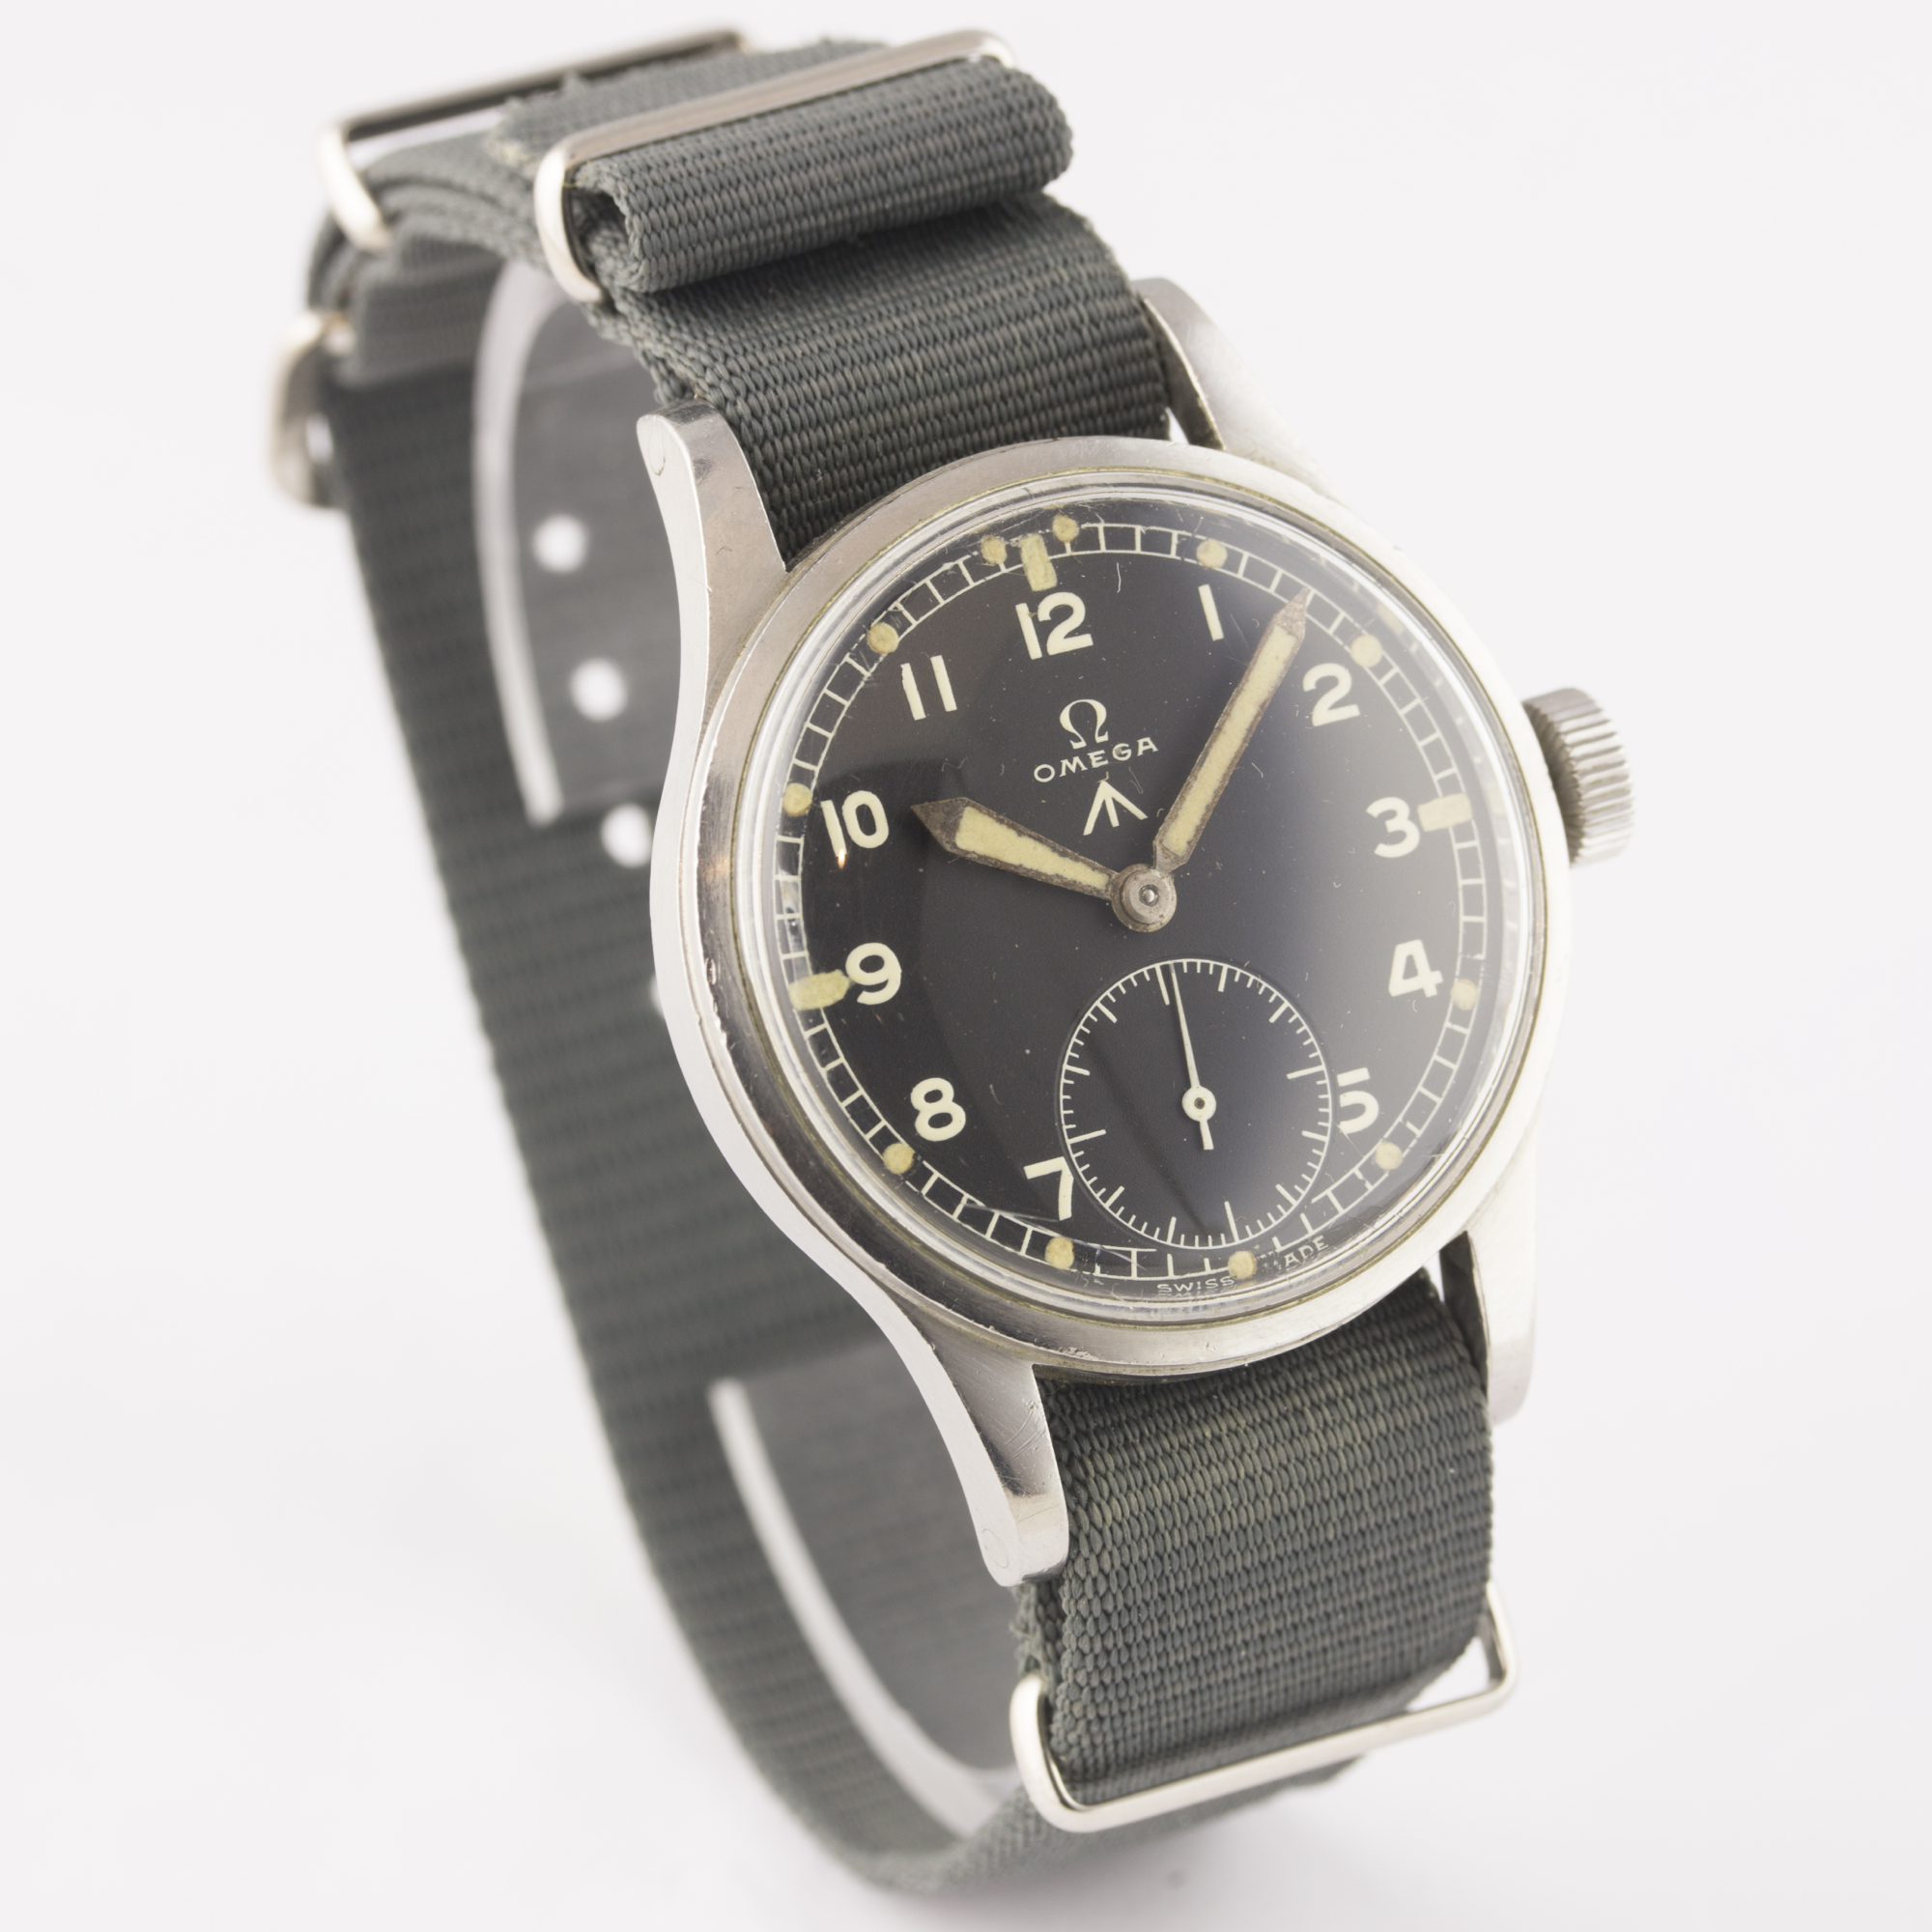 A GENTLEMAN'S STAINLESS STEEL BRITISH MILITARY OMEGA W.W.W. WRIST WATCH CIRCA 1947, PART OF THE " - Image 5 of 8